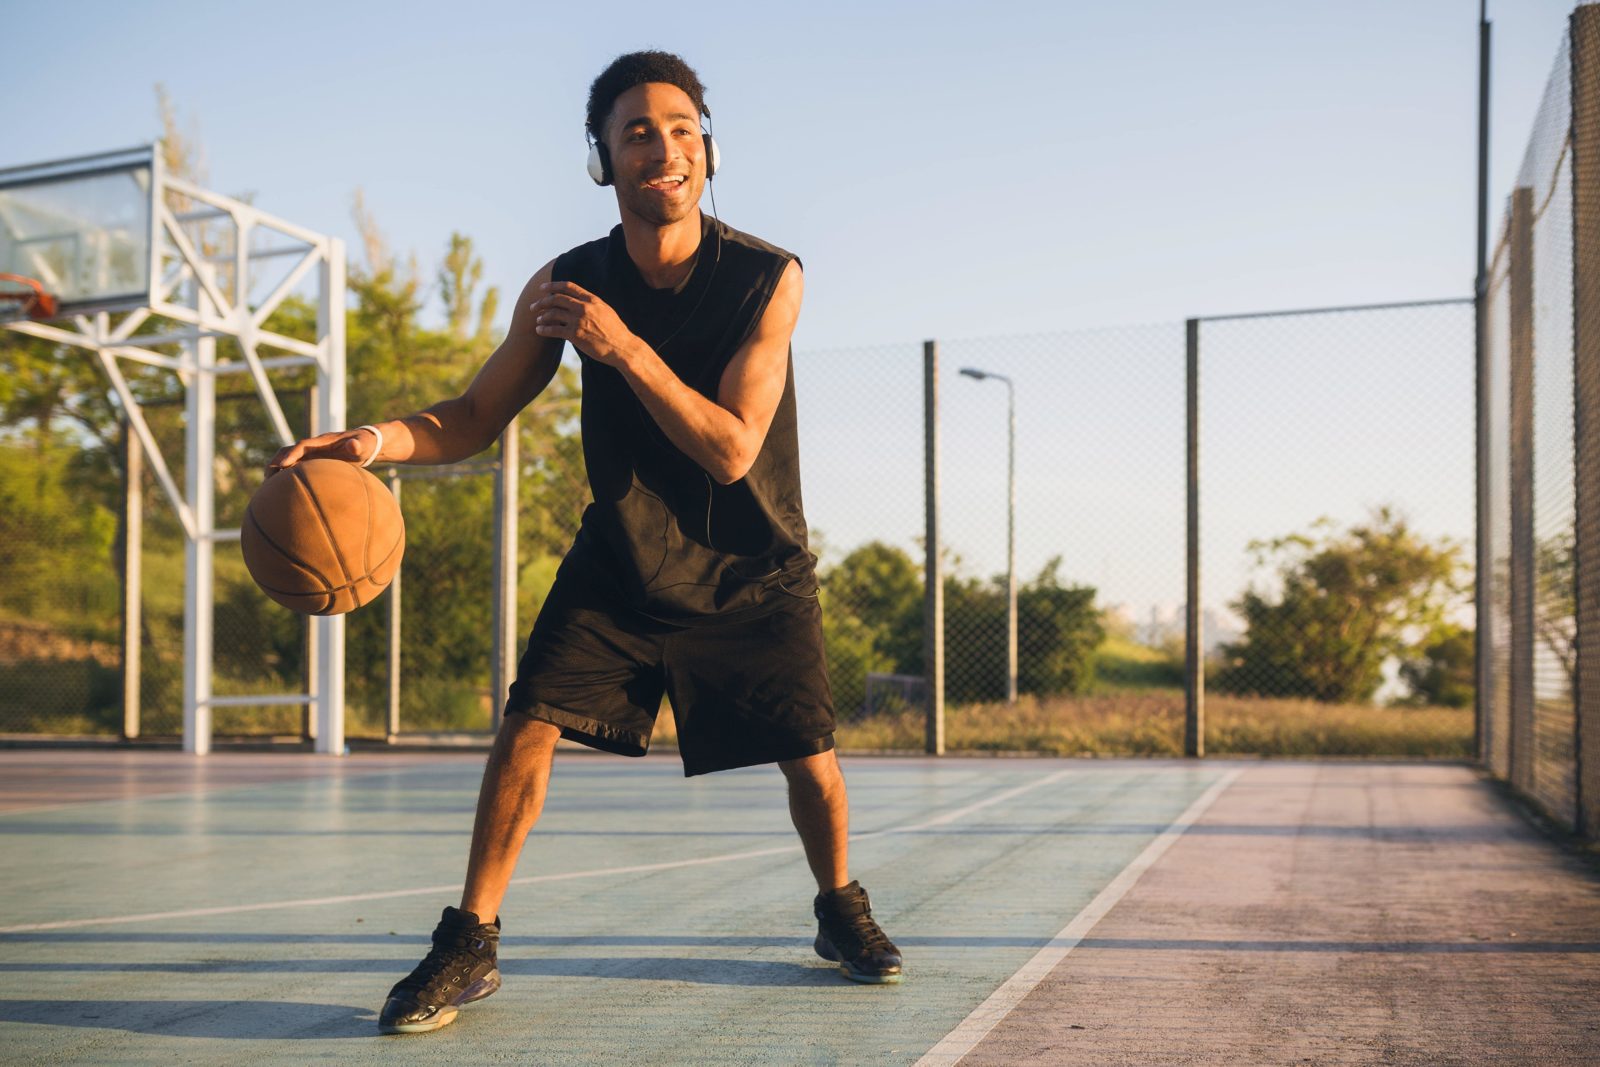 Basketball Drills You Can Do On Your Own | Field Insider